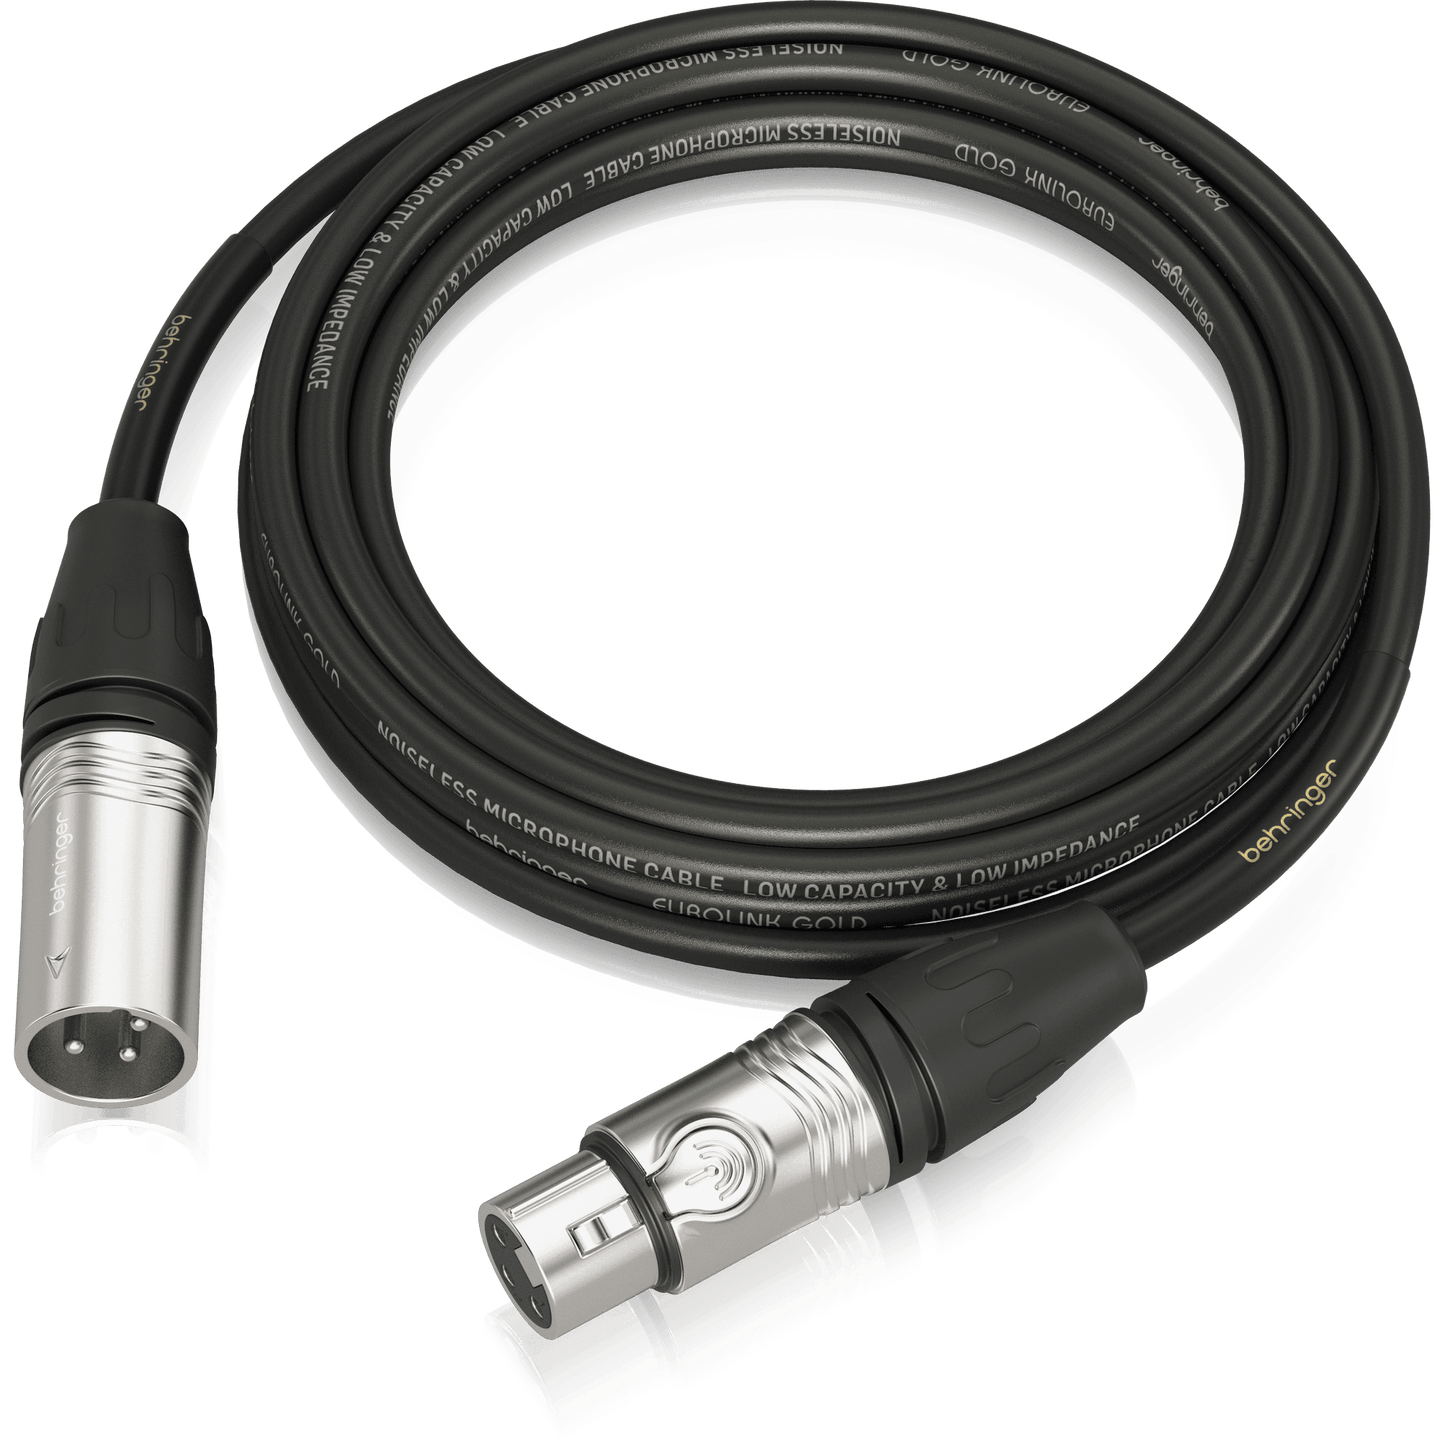 Behringer GMC-600 Gold Performance 6 m (20 ft) Microphone Cable with XLR Connectors